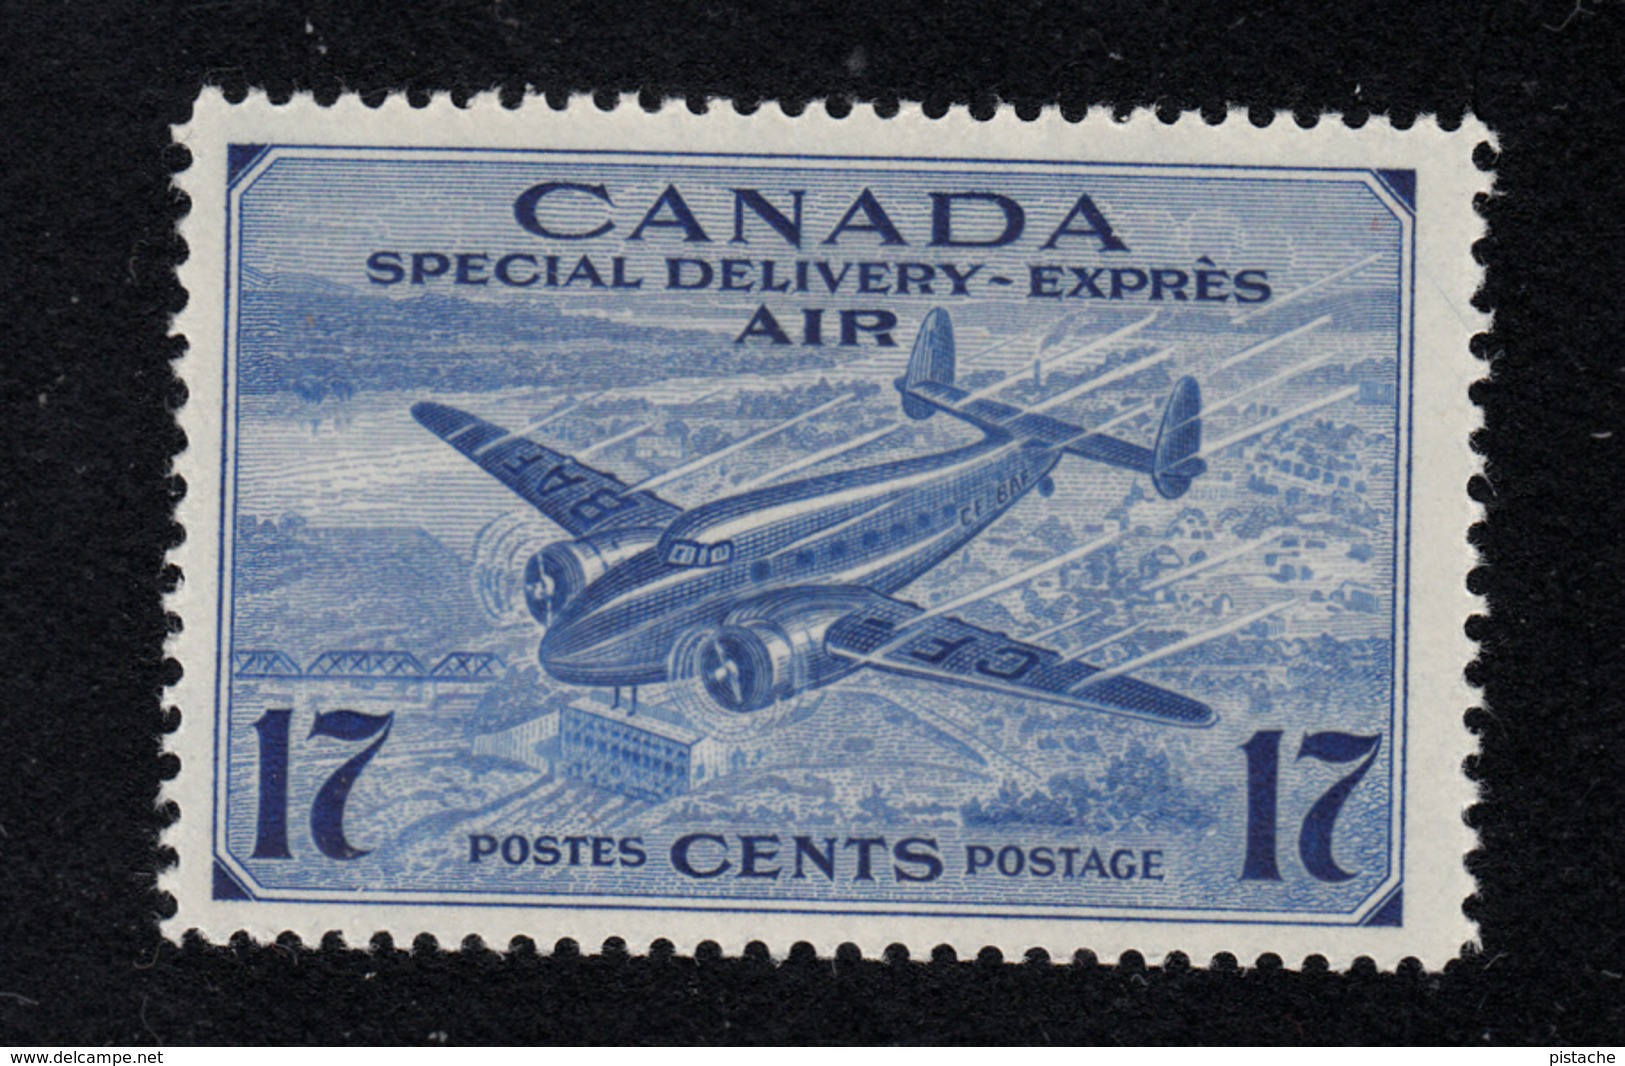 Canada Air Mail Special Delivery Stamp CE2 - Mint Never Hinged - VF Condition - Airmail: Special Delivery